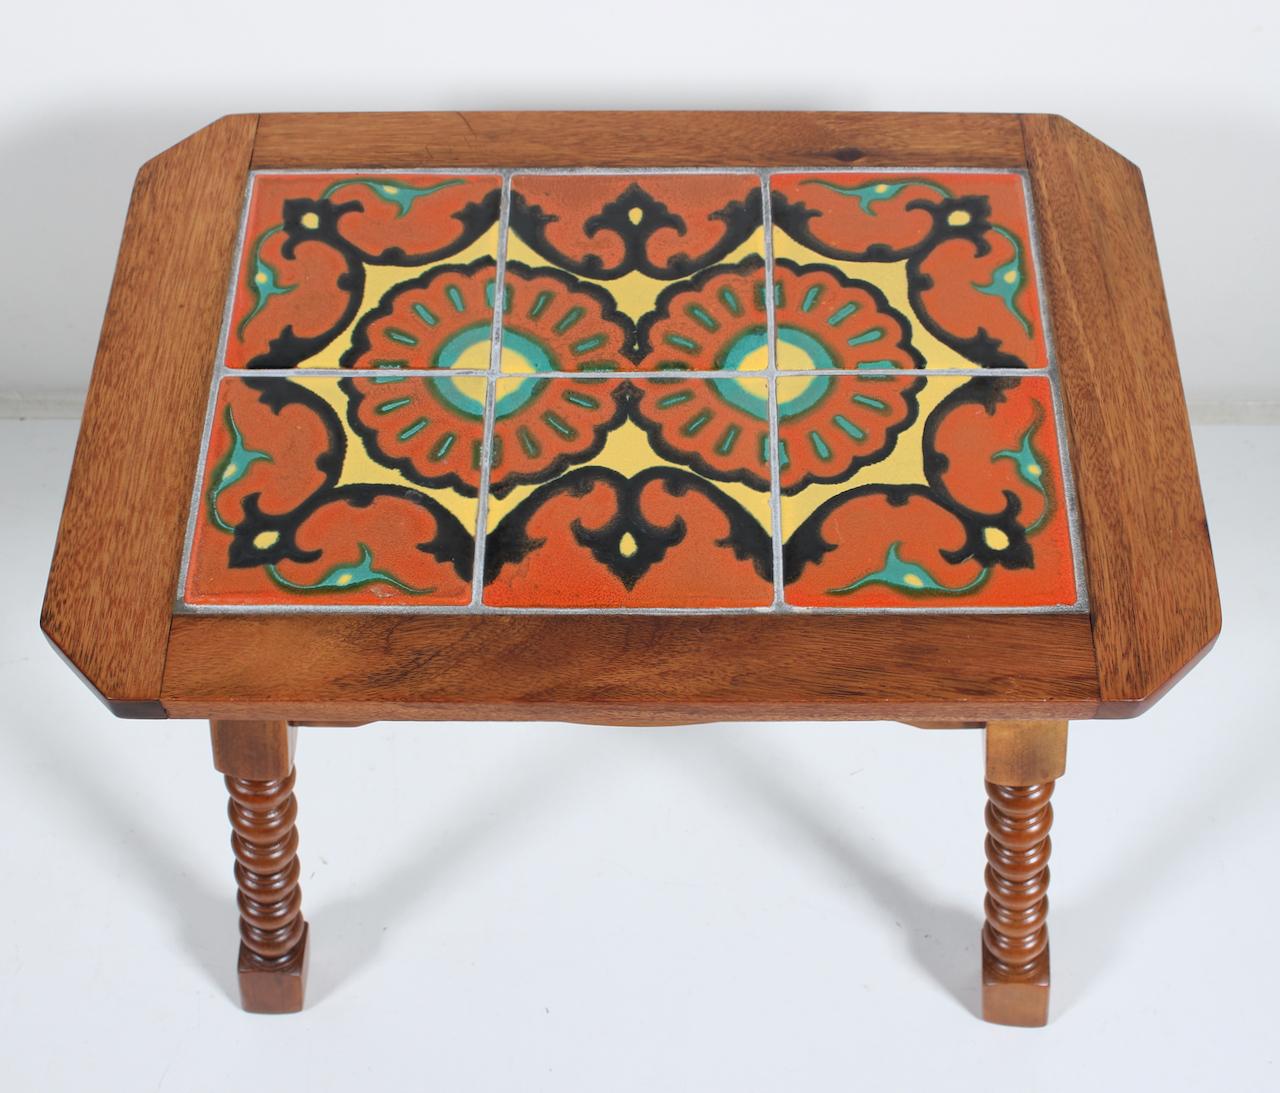 Ceramic Monterey Style Turned End Table with Orange & Yellow Spanish Tiles, C. 1930 For Sale